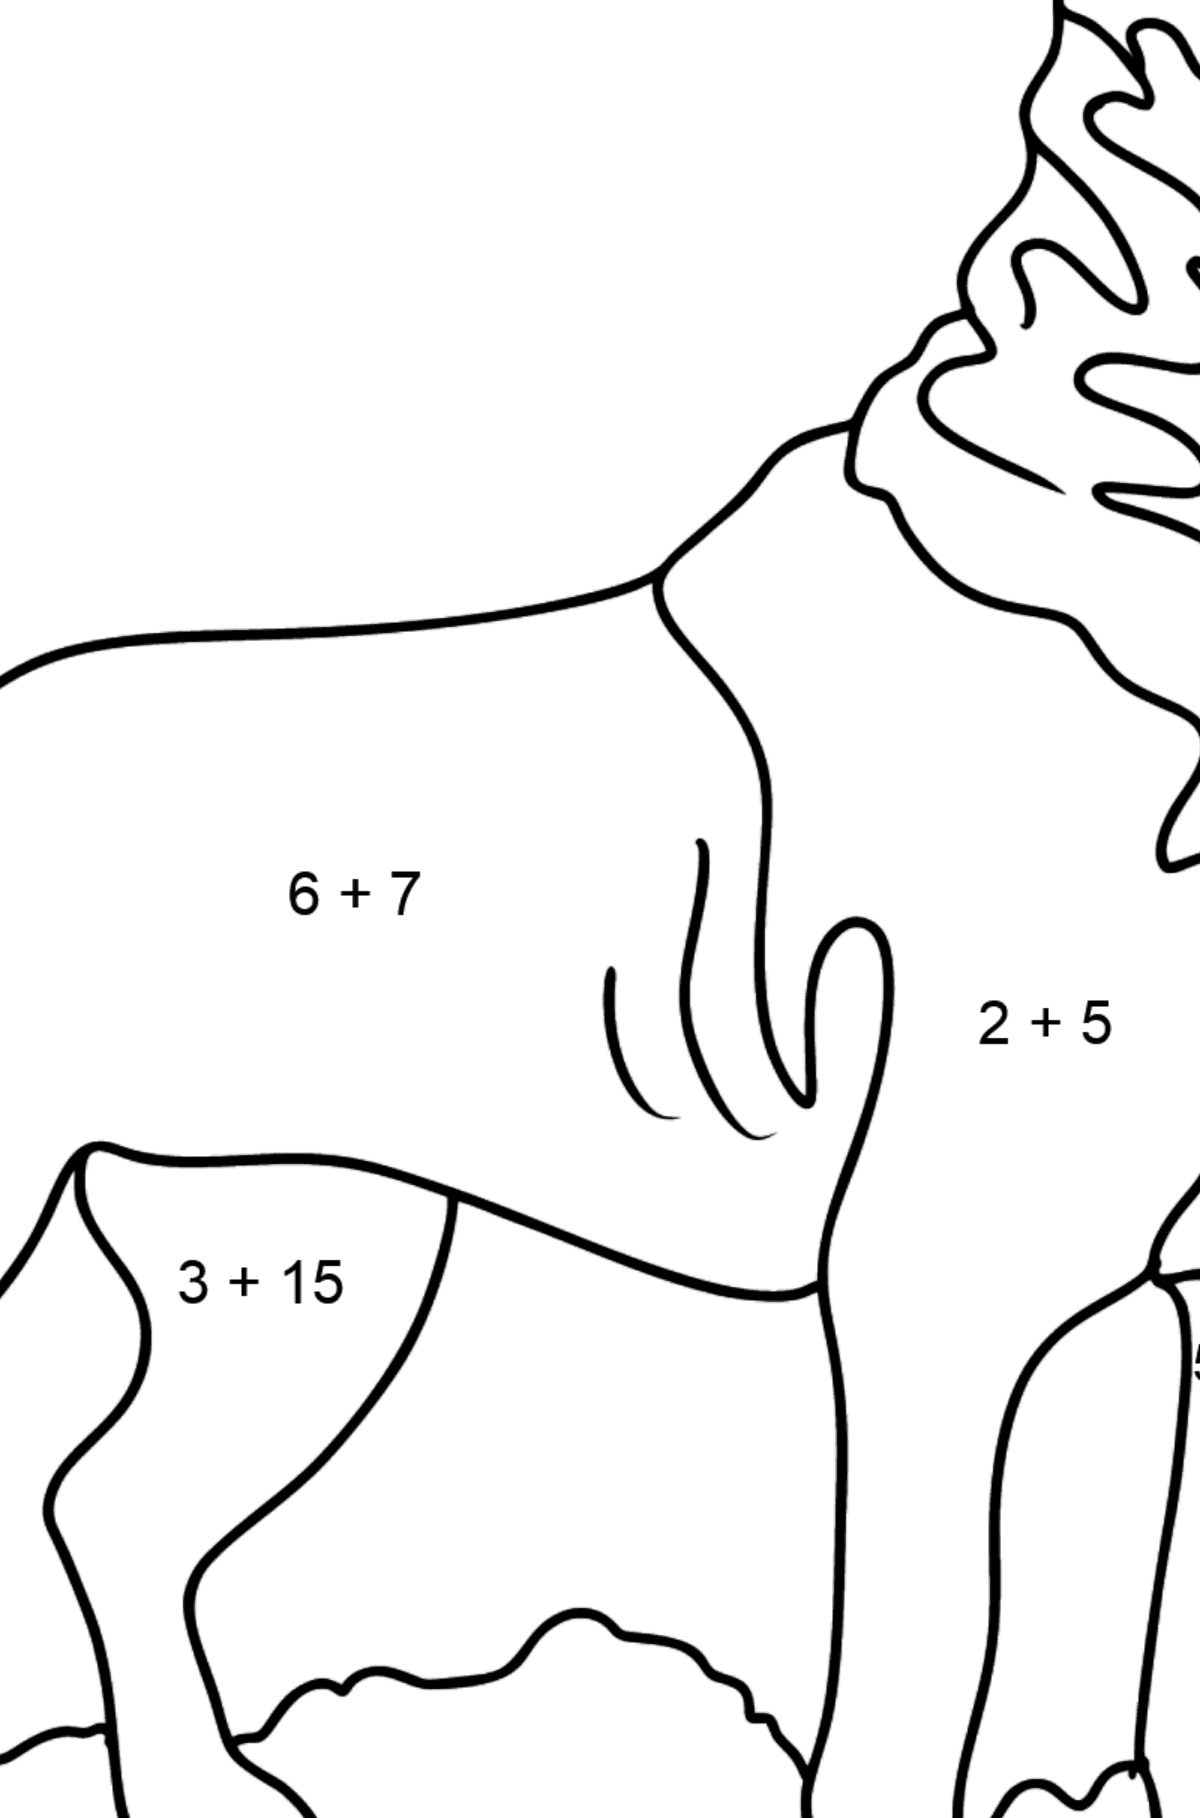 Rottweiler coloring page - Math Coloring - Addition for Kids